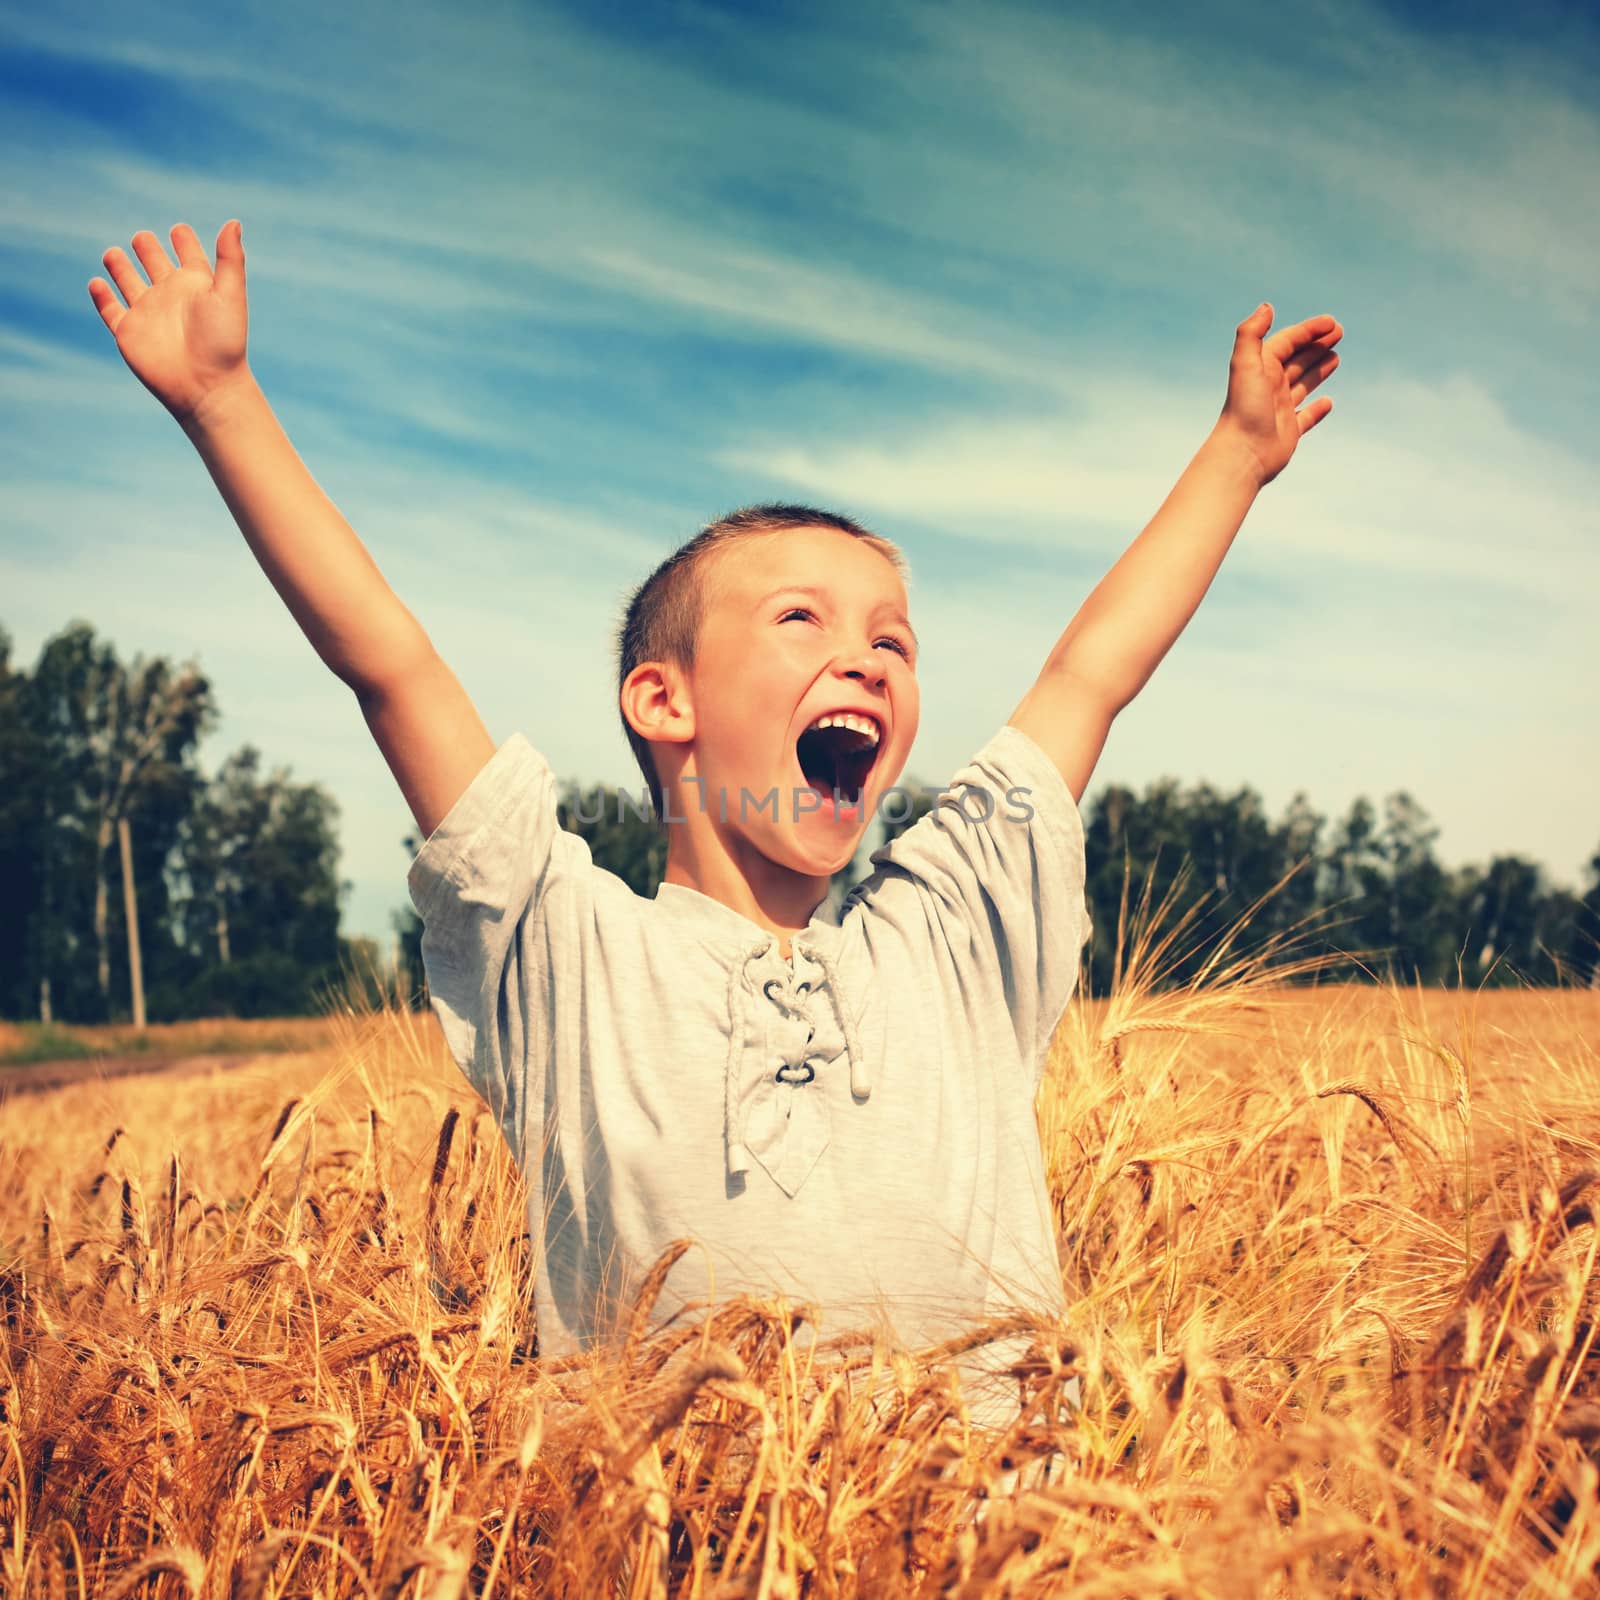 Happy Kid in the Field by sabphoto